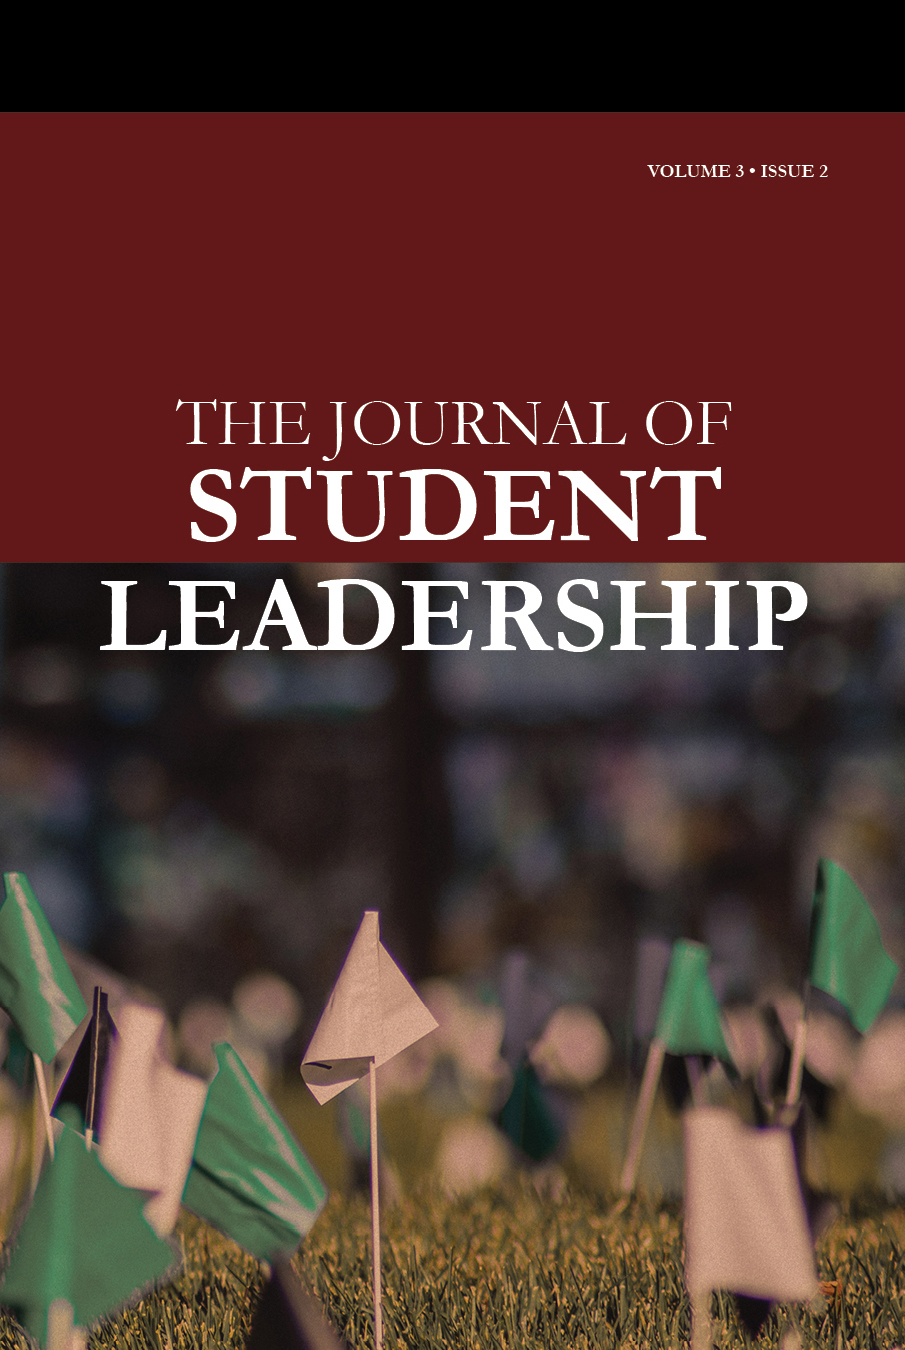 					View Vol. 3 No. 2 (2019): The Journal of Student Leadership
				